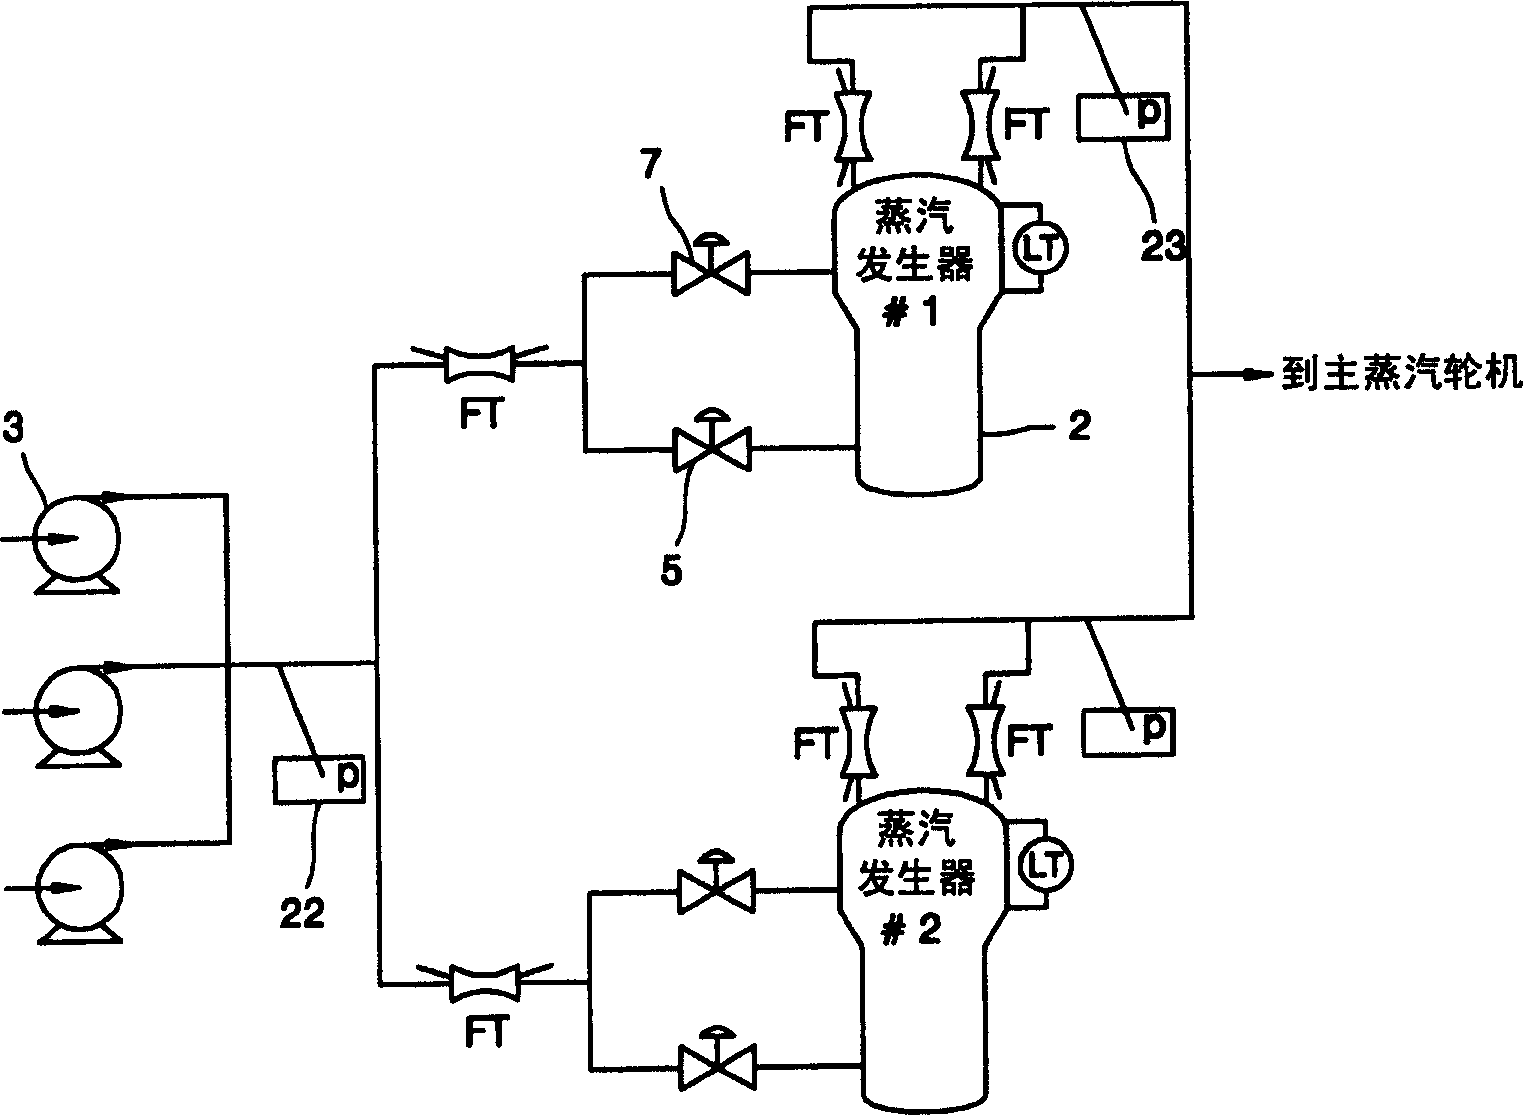 Water supply control system and control method considering pressure drop of water supply control valve in nuclear power station